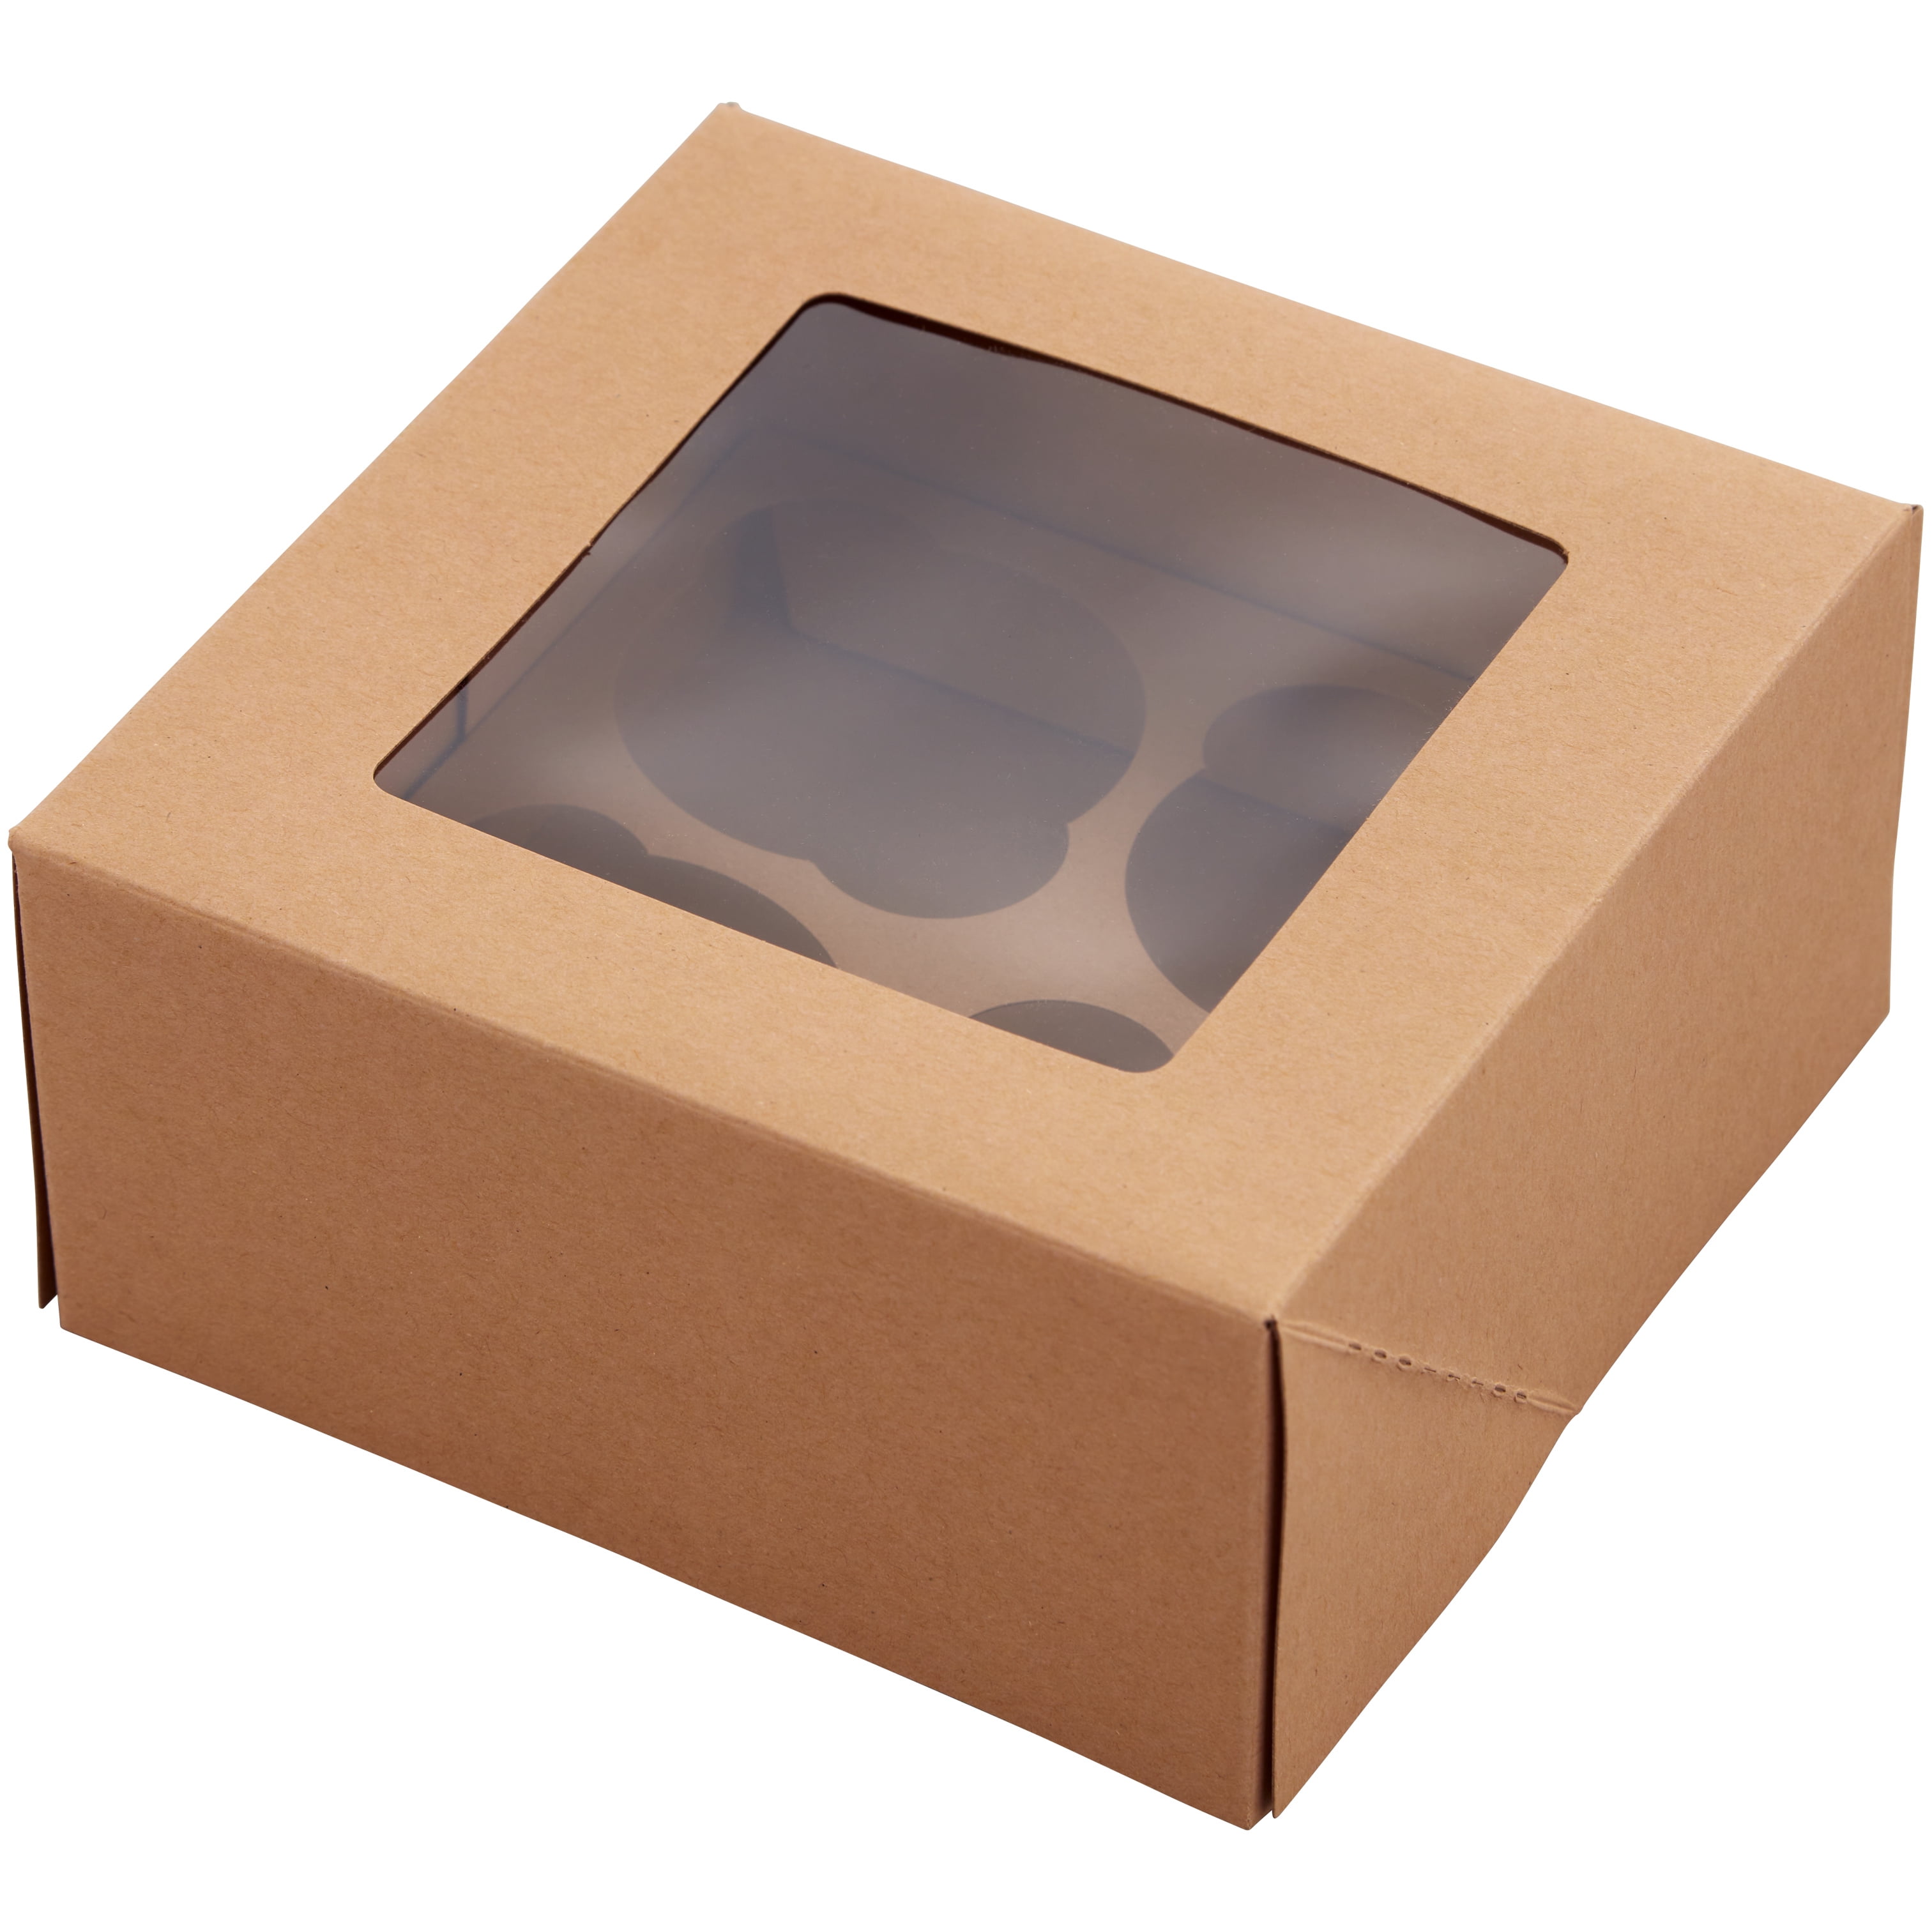 Storage Box for Chocolates White Kraft Box 20 Pack 19 x 11 x 4.5 cm Party - Cupcake Boxes Gifts Festivals & Wedding Occasions Pie/Bakery Box - Flat Pack Presentation Boxes